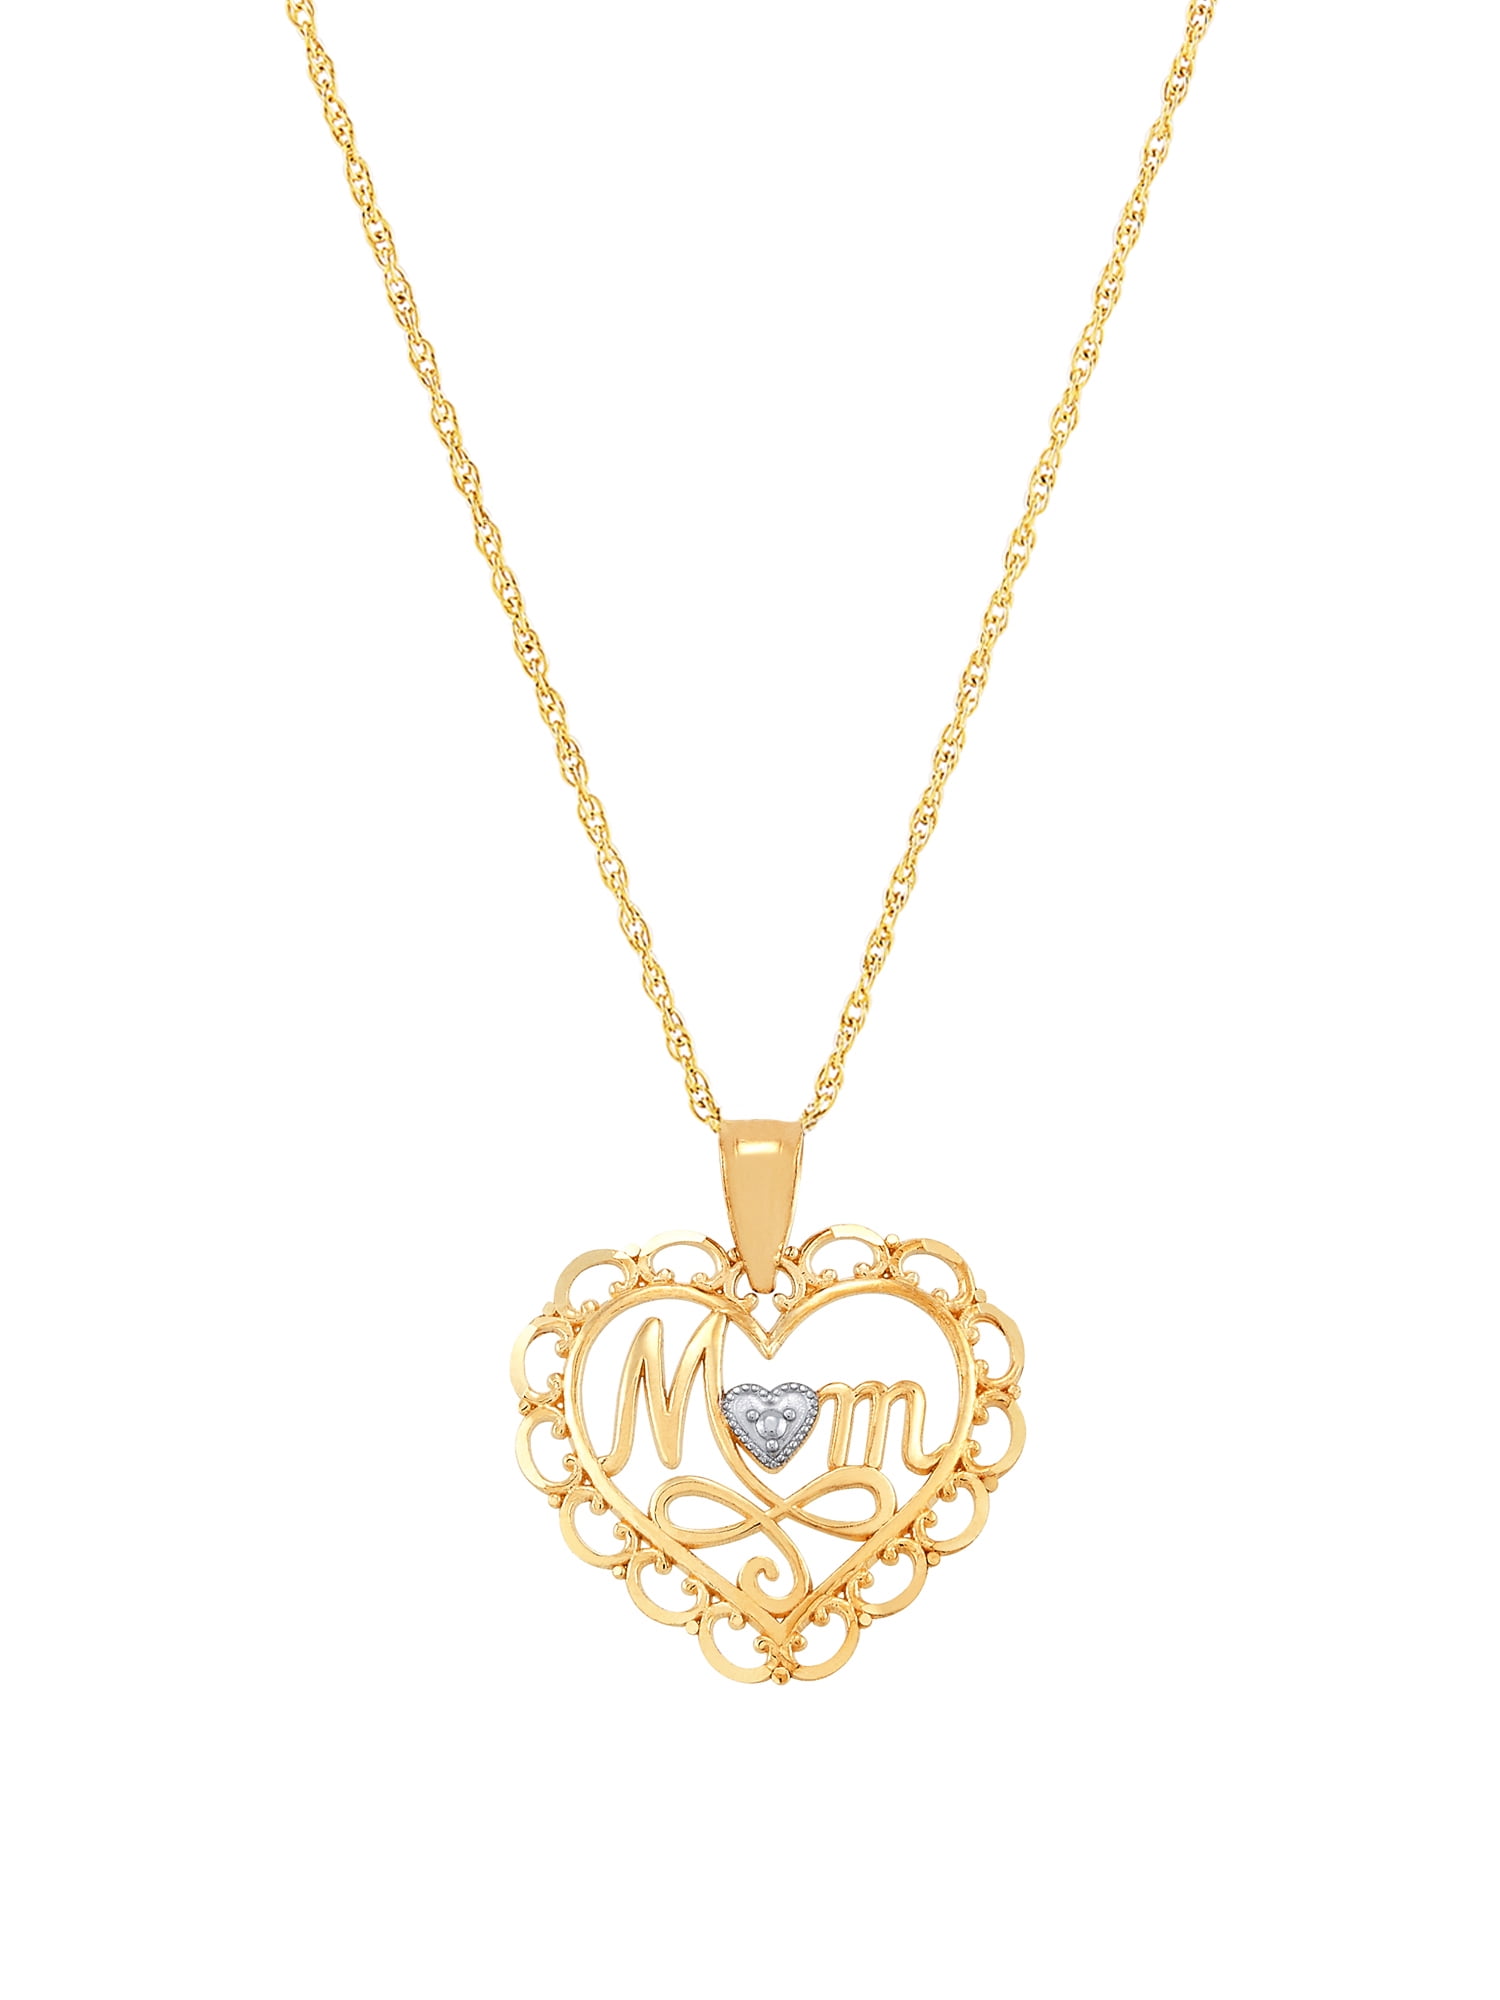 Solid Gold Hearts Pendant with Gold Filled Chain Beautiful 10K Solid Gold Pendant with 14K Necklace and Pendant for Wife Love Present